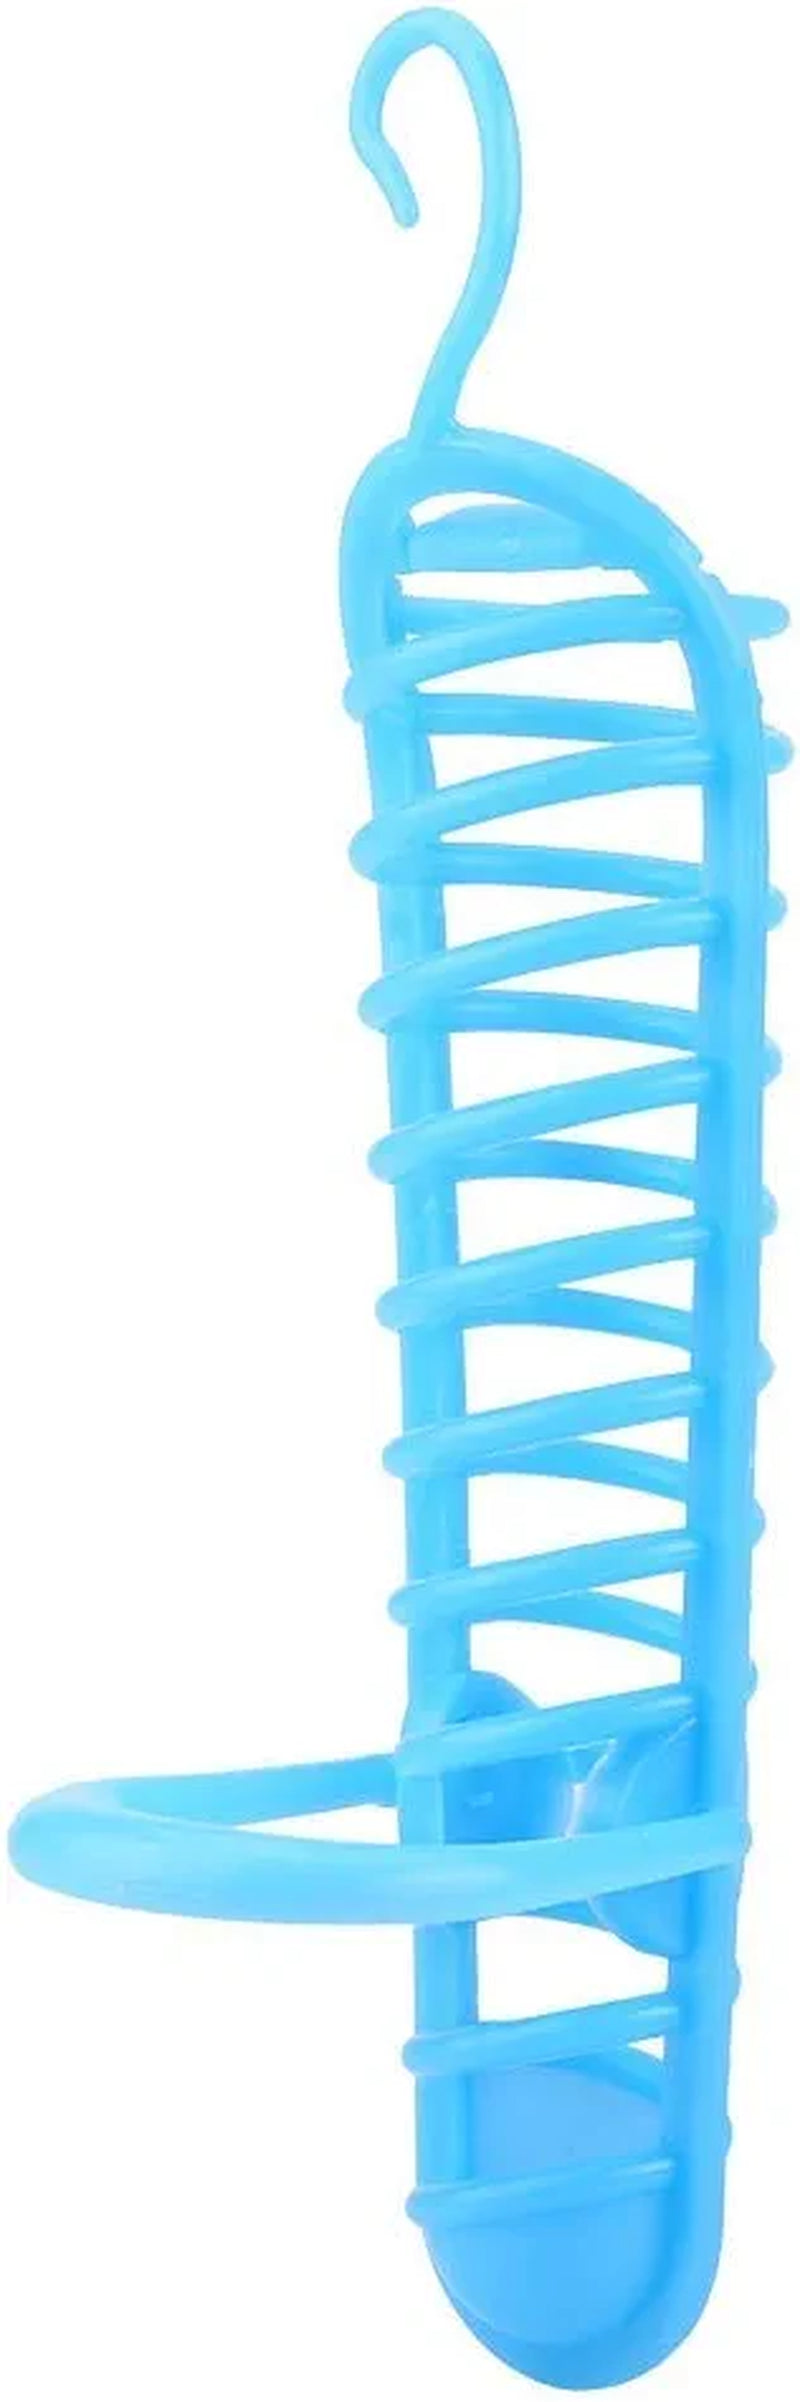 Parrots Feeder Basket Plastic Food Fruit Feeding Perch Stand Holder for Pet Bird Supplies Fruit Vegetable Millet Container(Blue) Animals & Pet Supplies > Pet Supplies > Bird Supplies > Bird Cage Accessories > Bird Cage Food & Water Dishes Fdit   